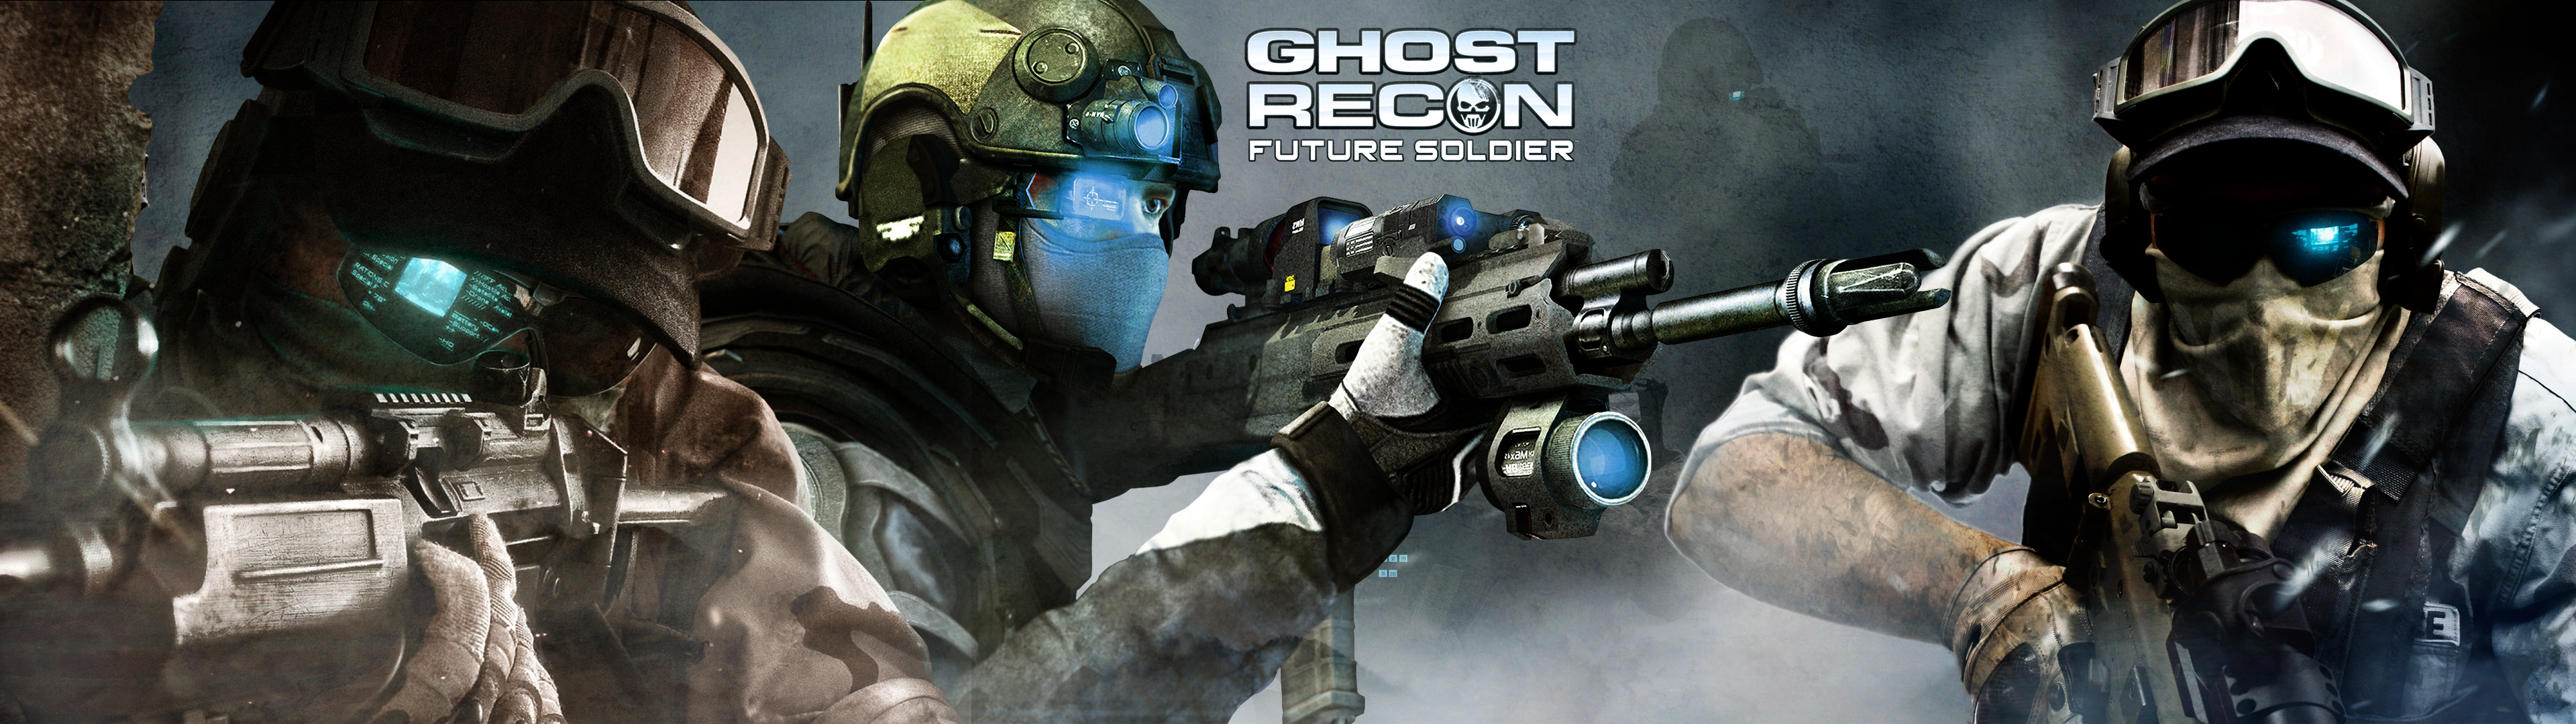 General 3840x1080 special forces tactical military video games smoke assault rifle dual monitors multiple display Tom Clancy's Ghost Recon Tom Clancy's Ghost Recon: Future Soldier Ubisoft